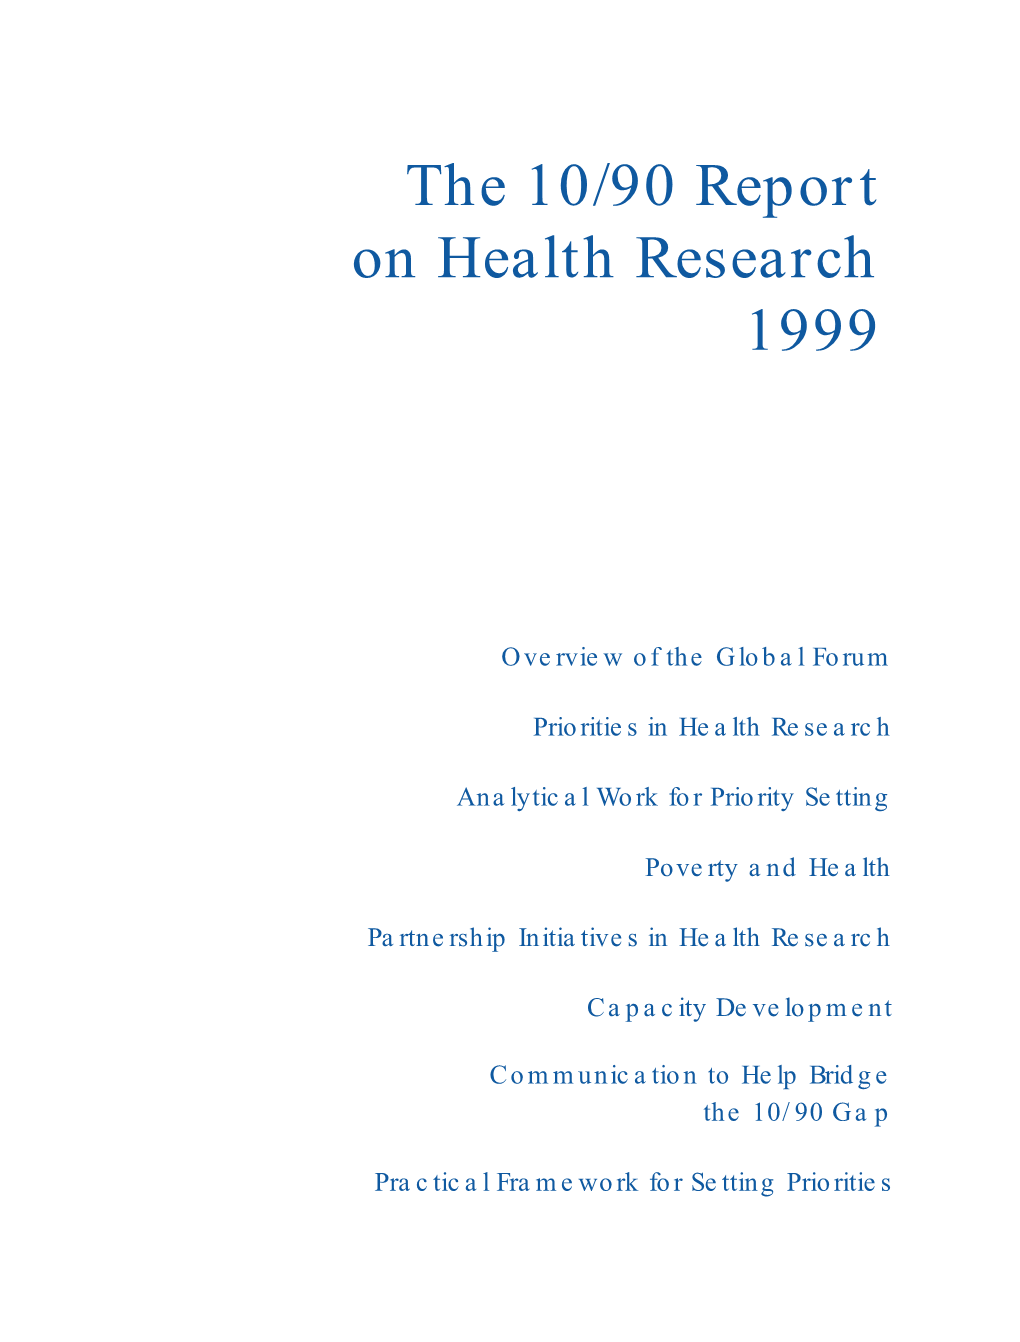 Global Forum for Health Research, 1999